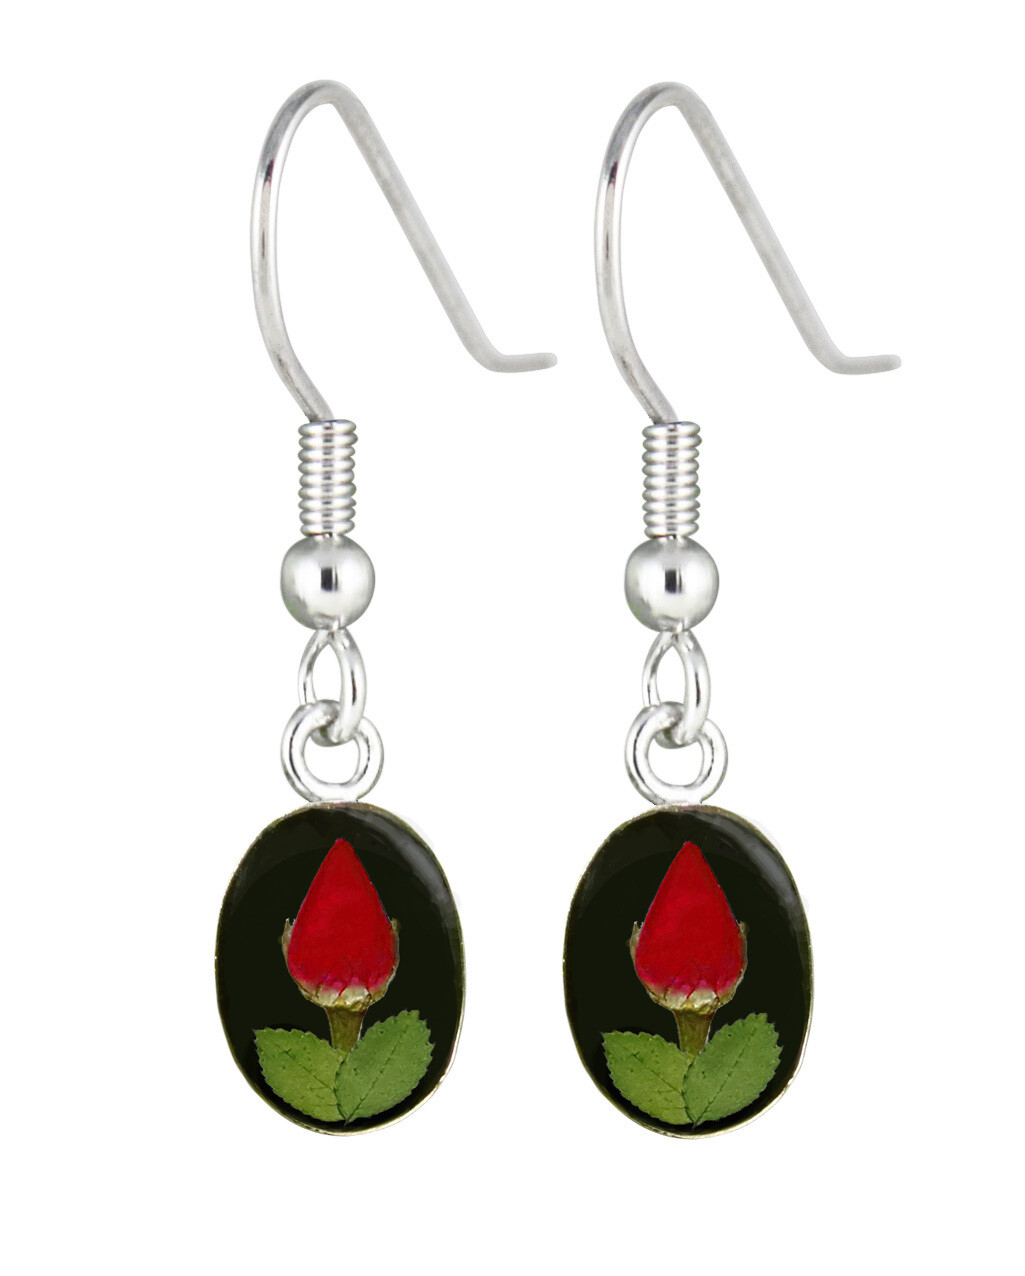 Rose, Small Oval Hanging Earrings, Black Background.